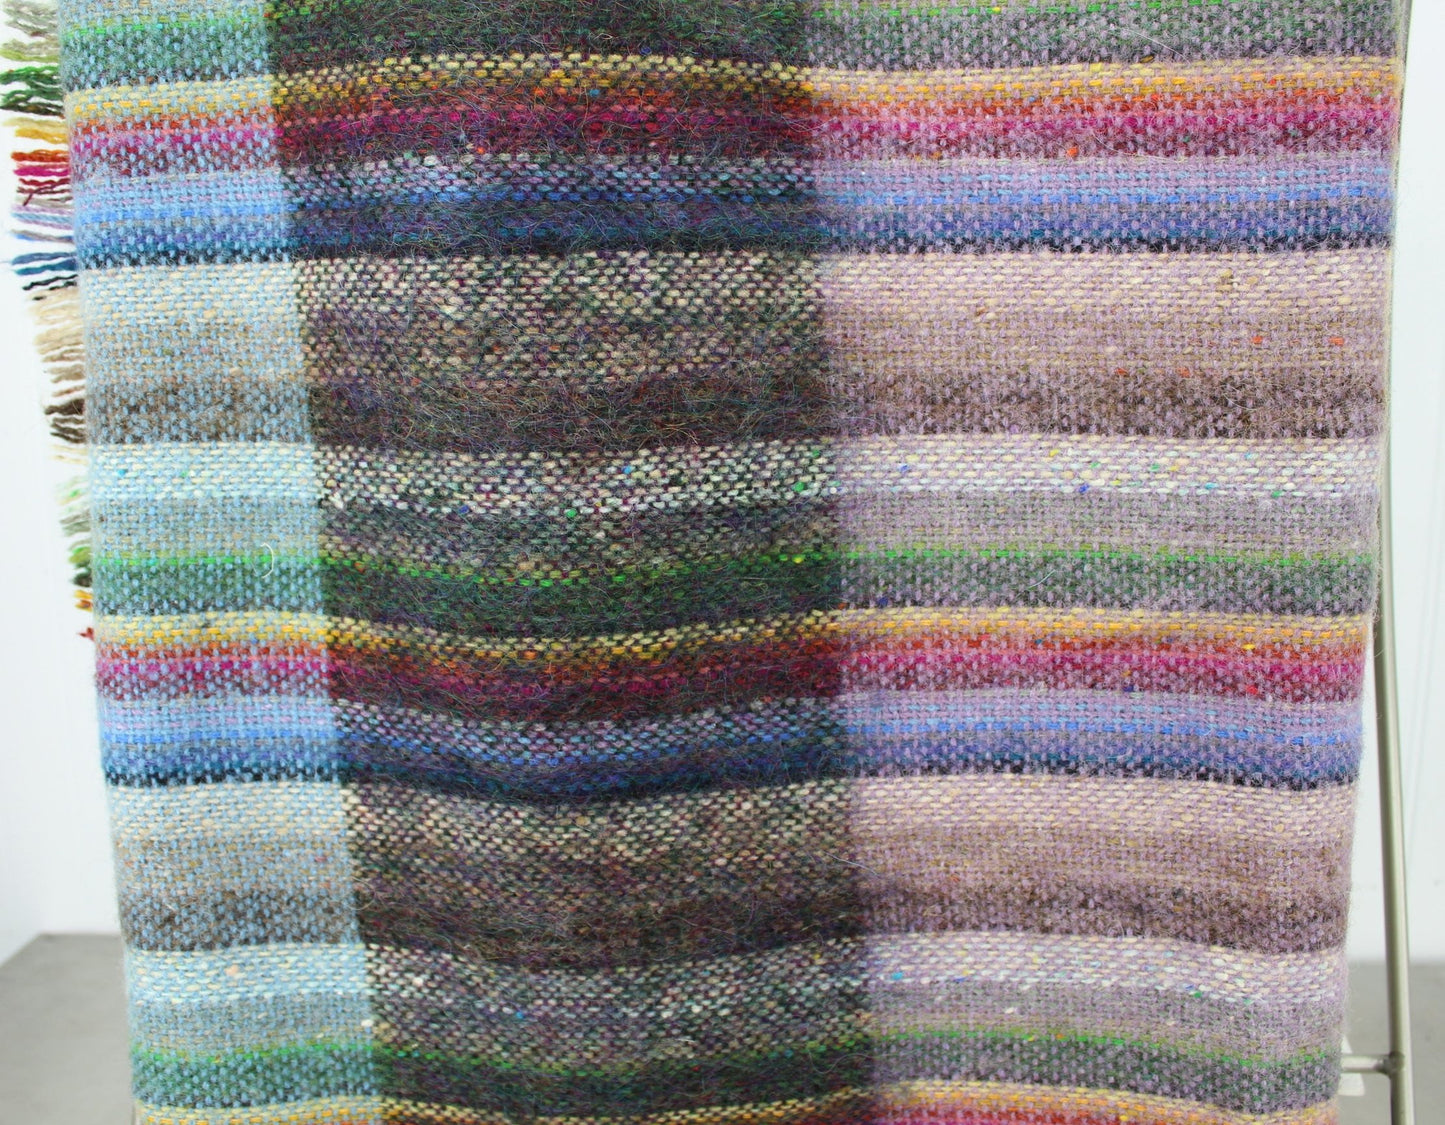 Donegal Handwoven Tweed John Molloy Throw Blanket - Lambswool Fringed Awesome lavender yellow brown